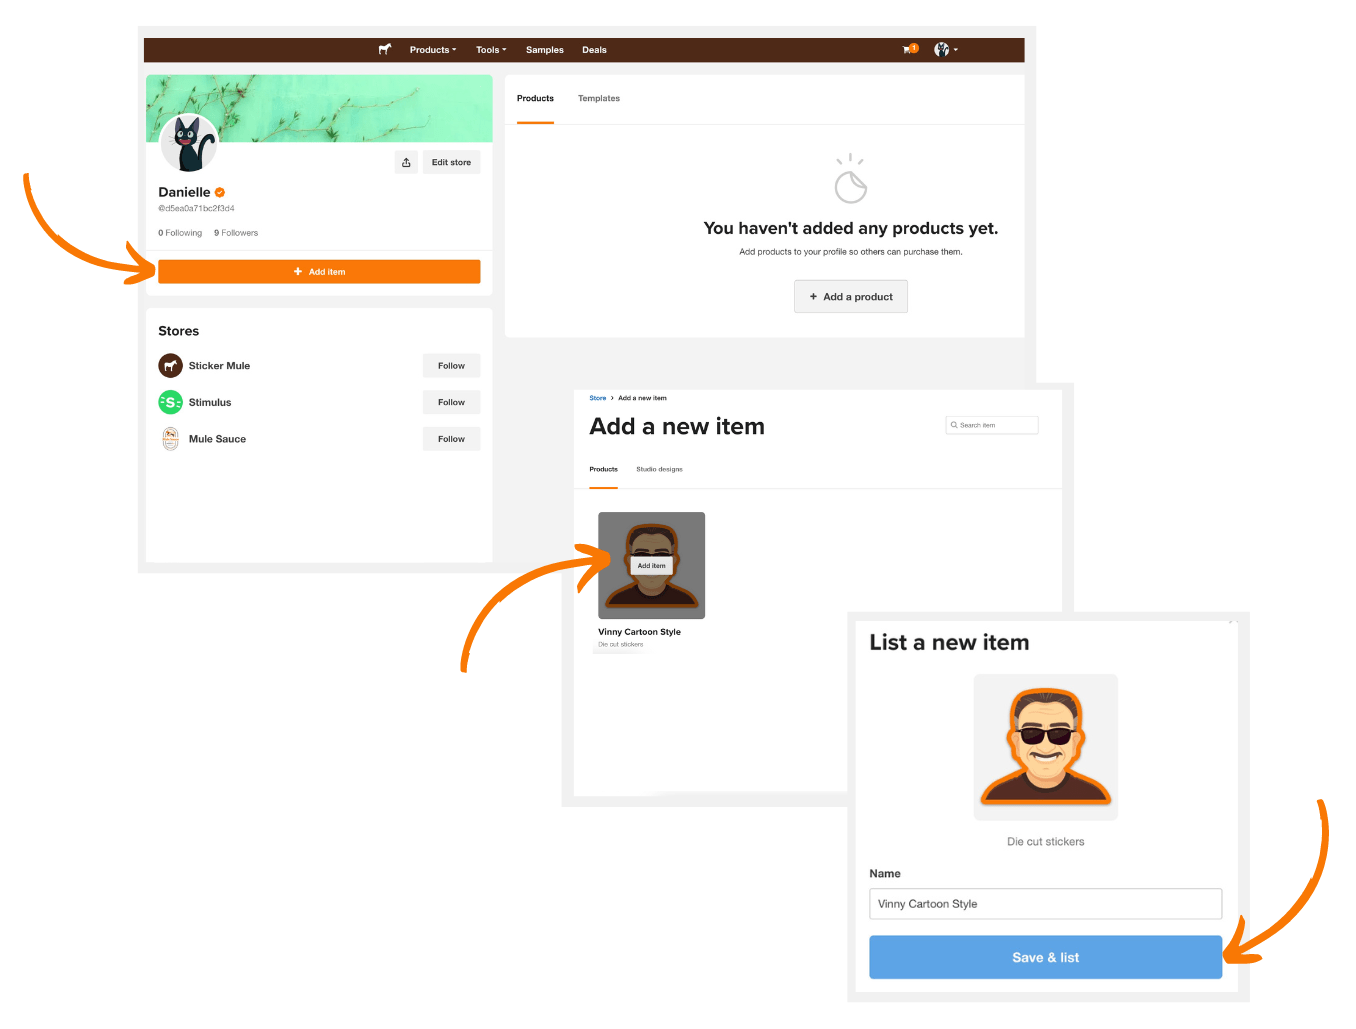 How to list an item in your sticker mule store